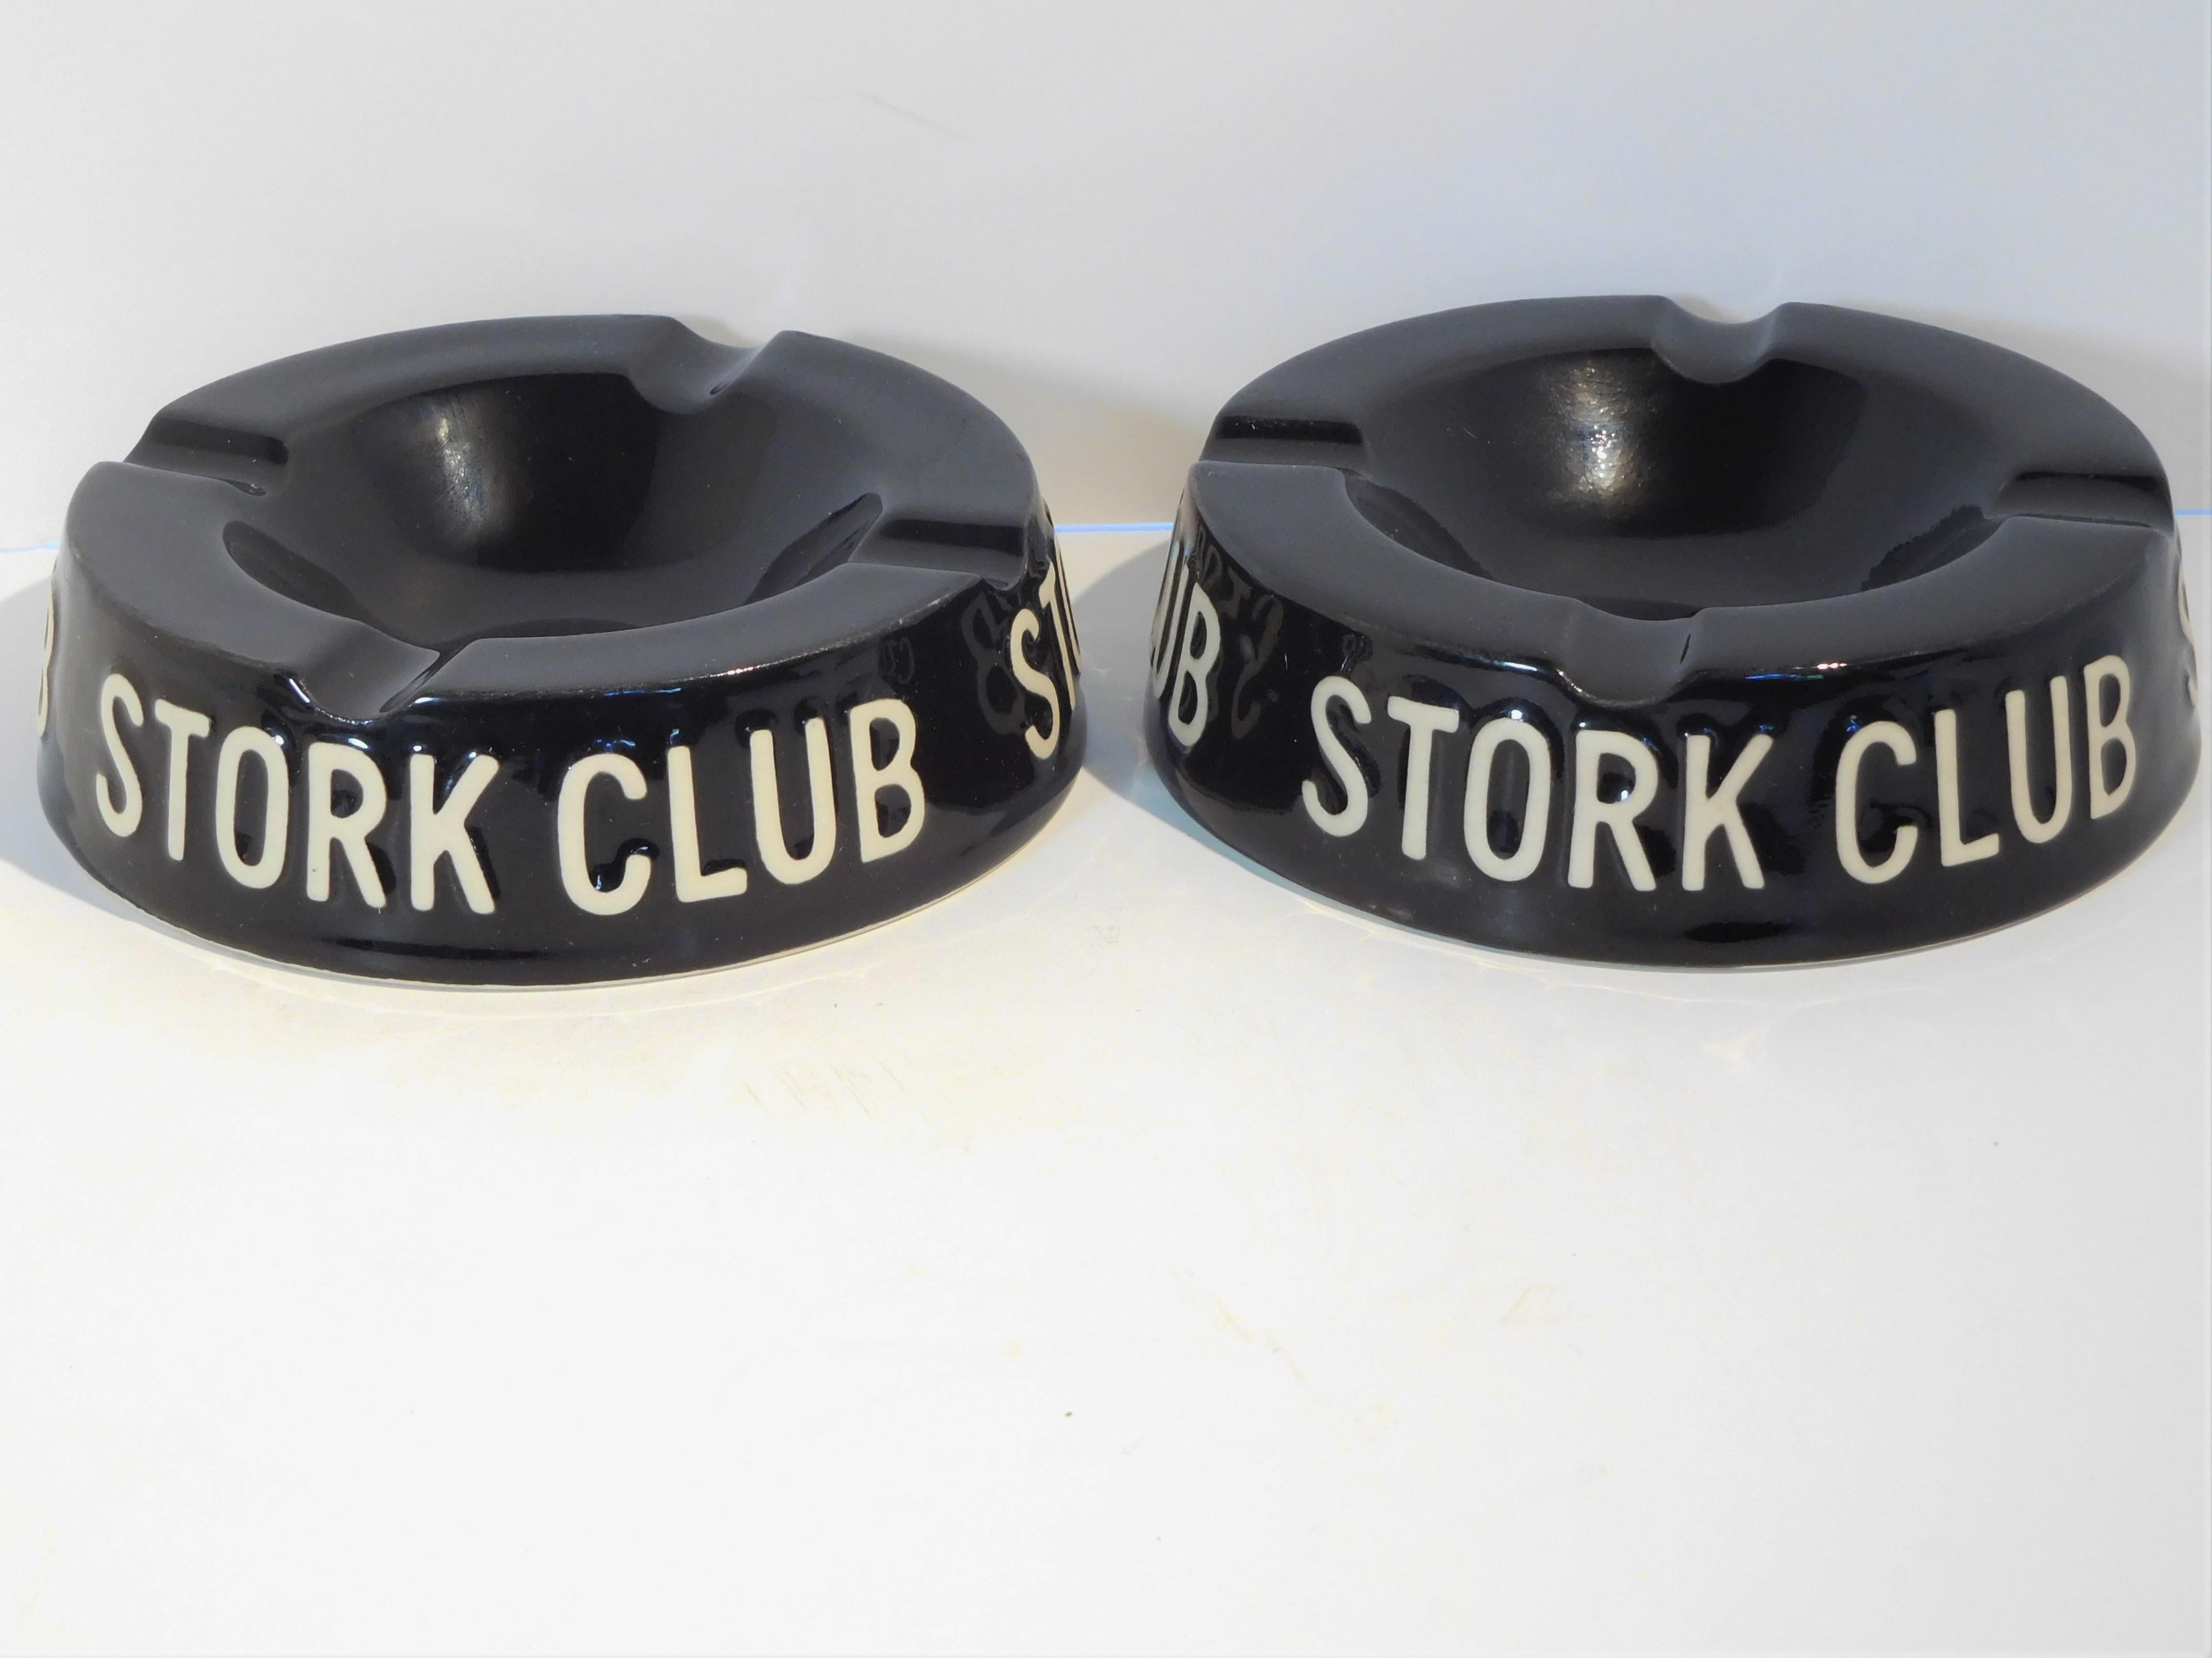 These two ashtrays are from tables at the Stork Club, the iconic night spot on 3 East 53rd Street, New York, New York (1934-1965), operated by Sherman Billingsley. Who often gave away free gifts to his clients. The ashtrays are made of molded black